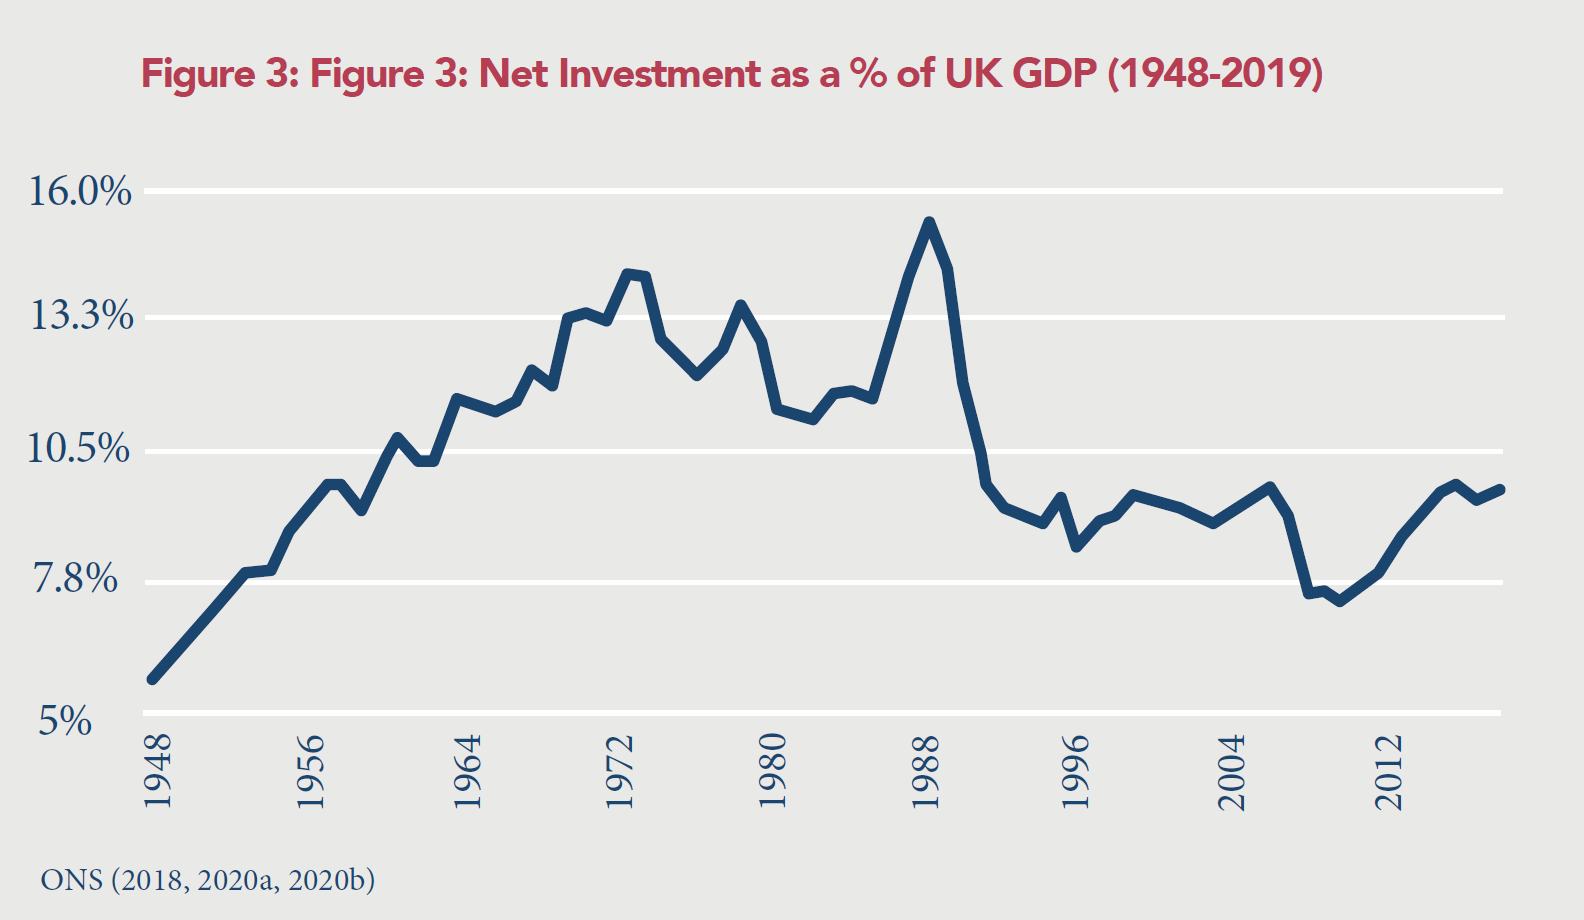 Figure: Net Investment as a % of GDP